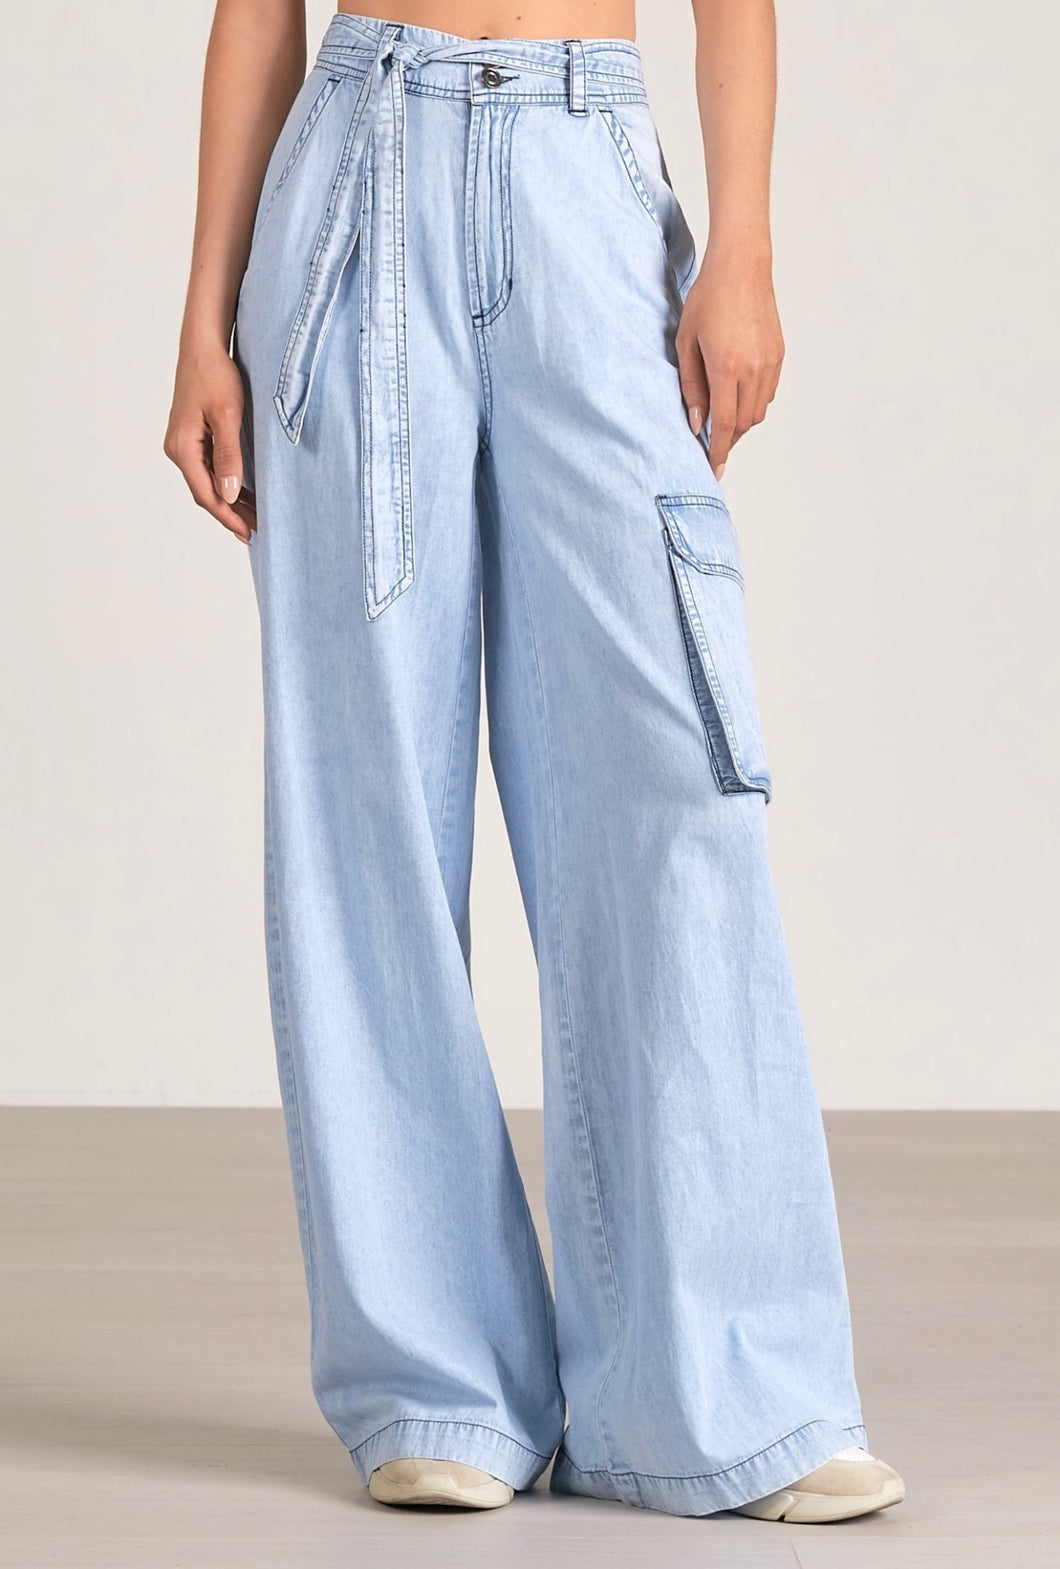 Crystal Water Jeans